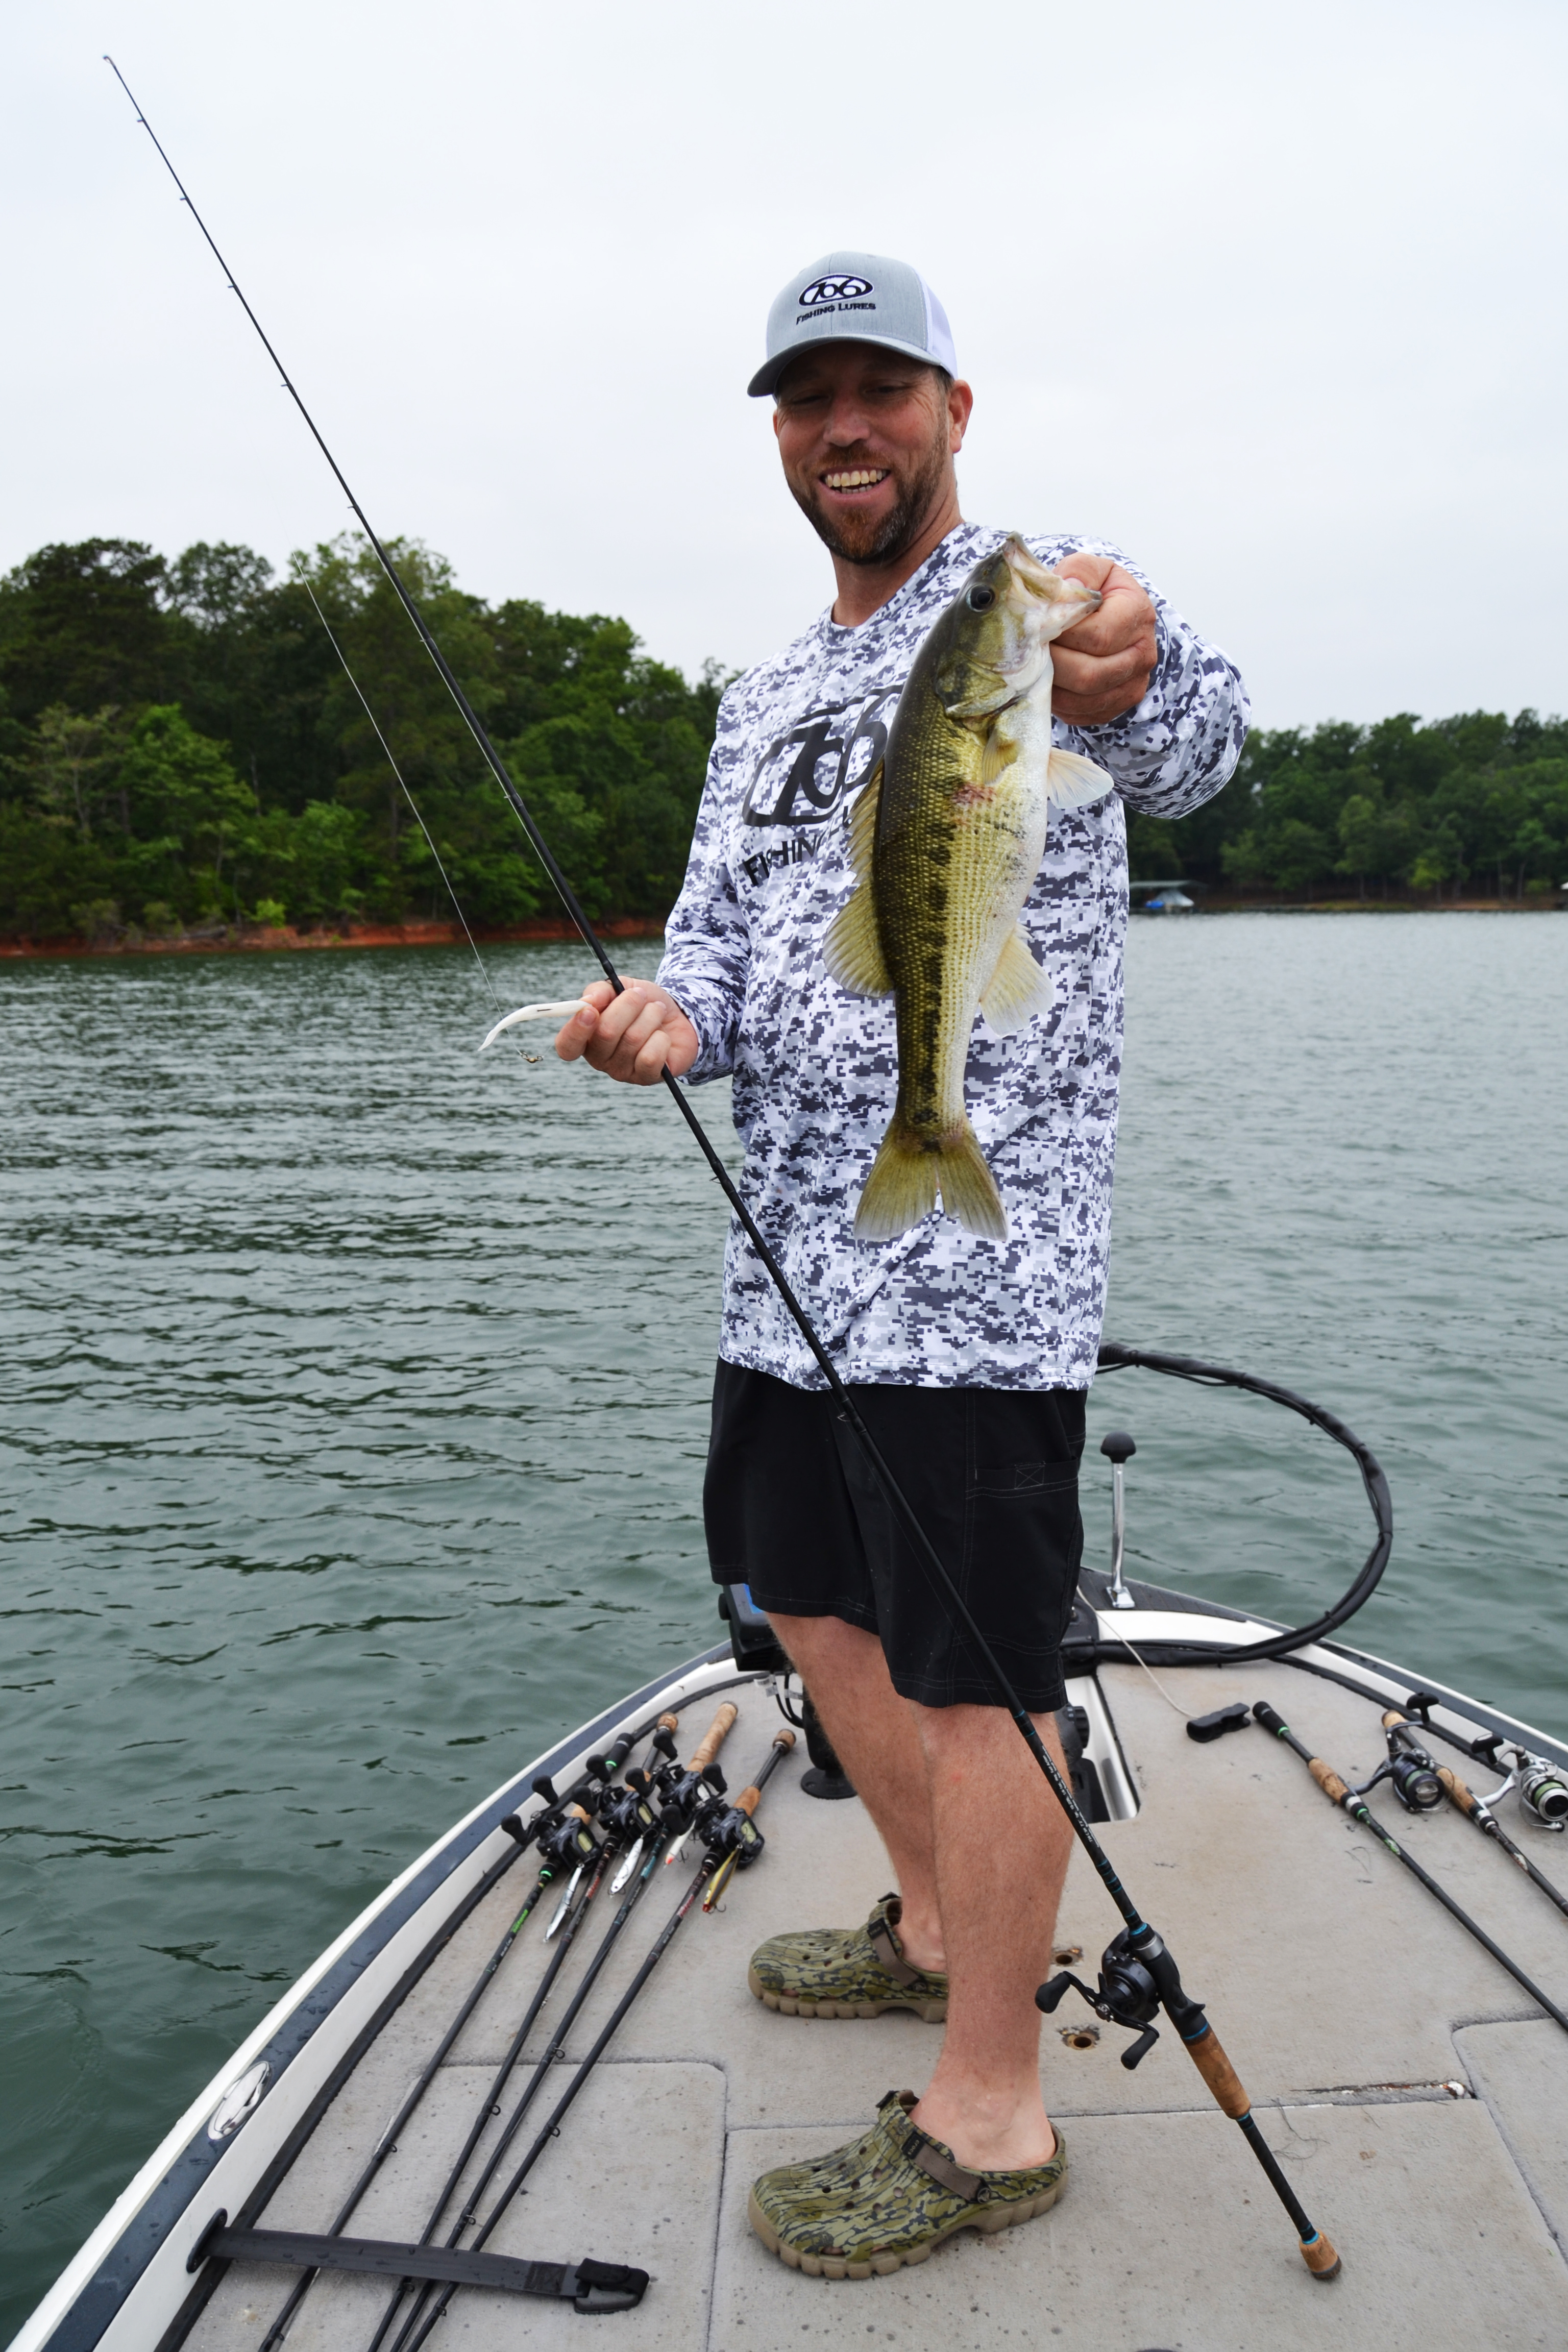 Fishing guide Josh Fowler shows a large-mouth fishing bass caught on Lake Hartwell. (Photo/Michael Isom)